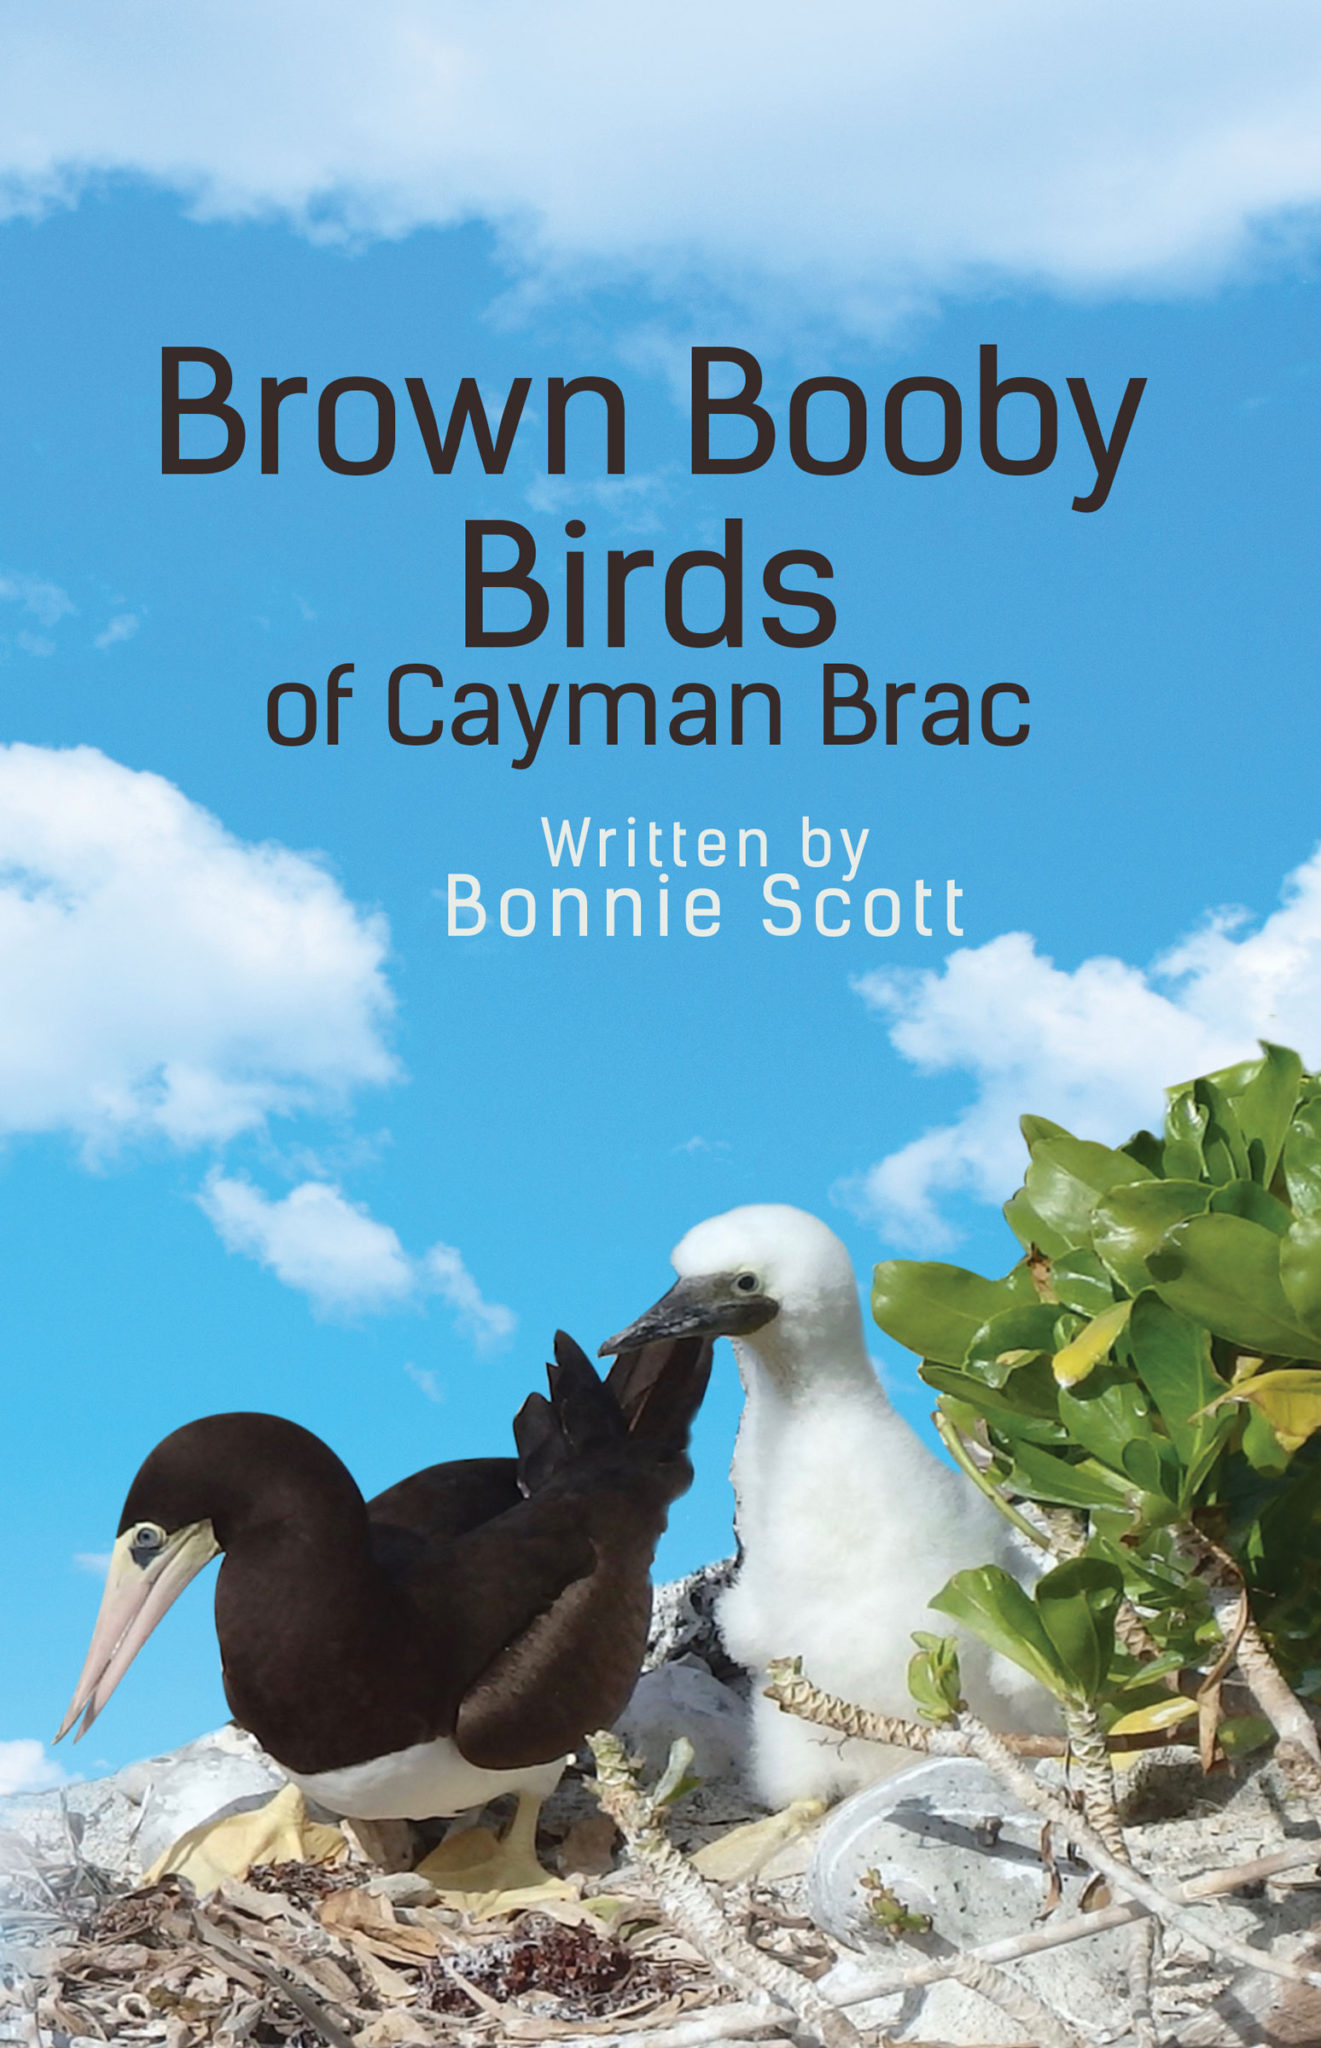 A book cover with a blue sky, white clouds and brown booby birds on the beach